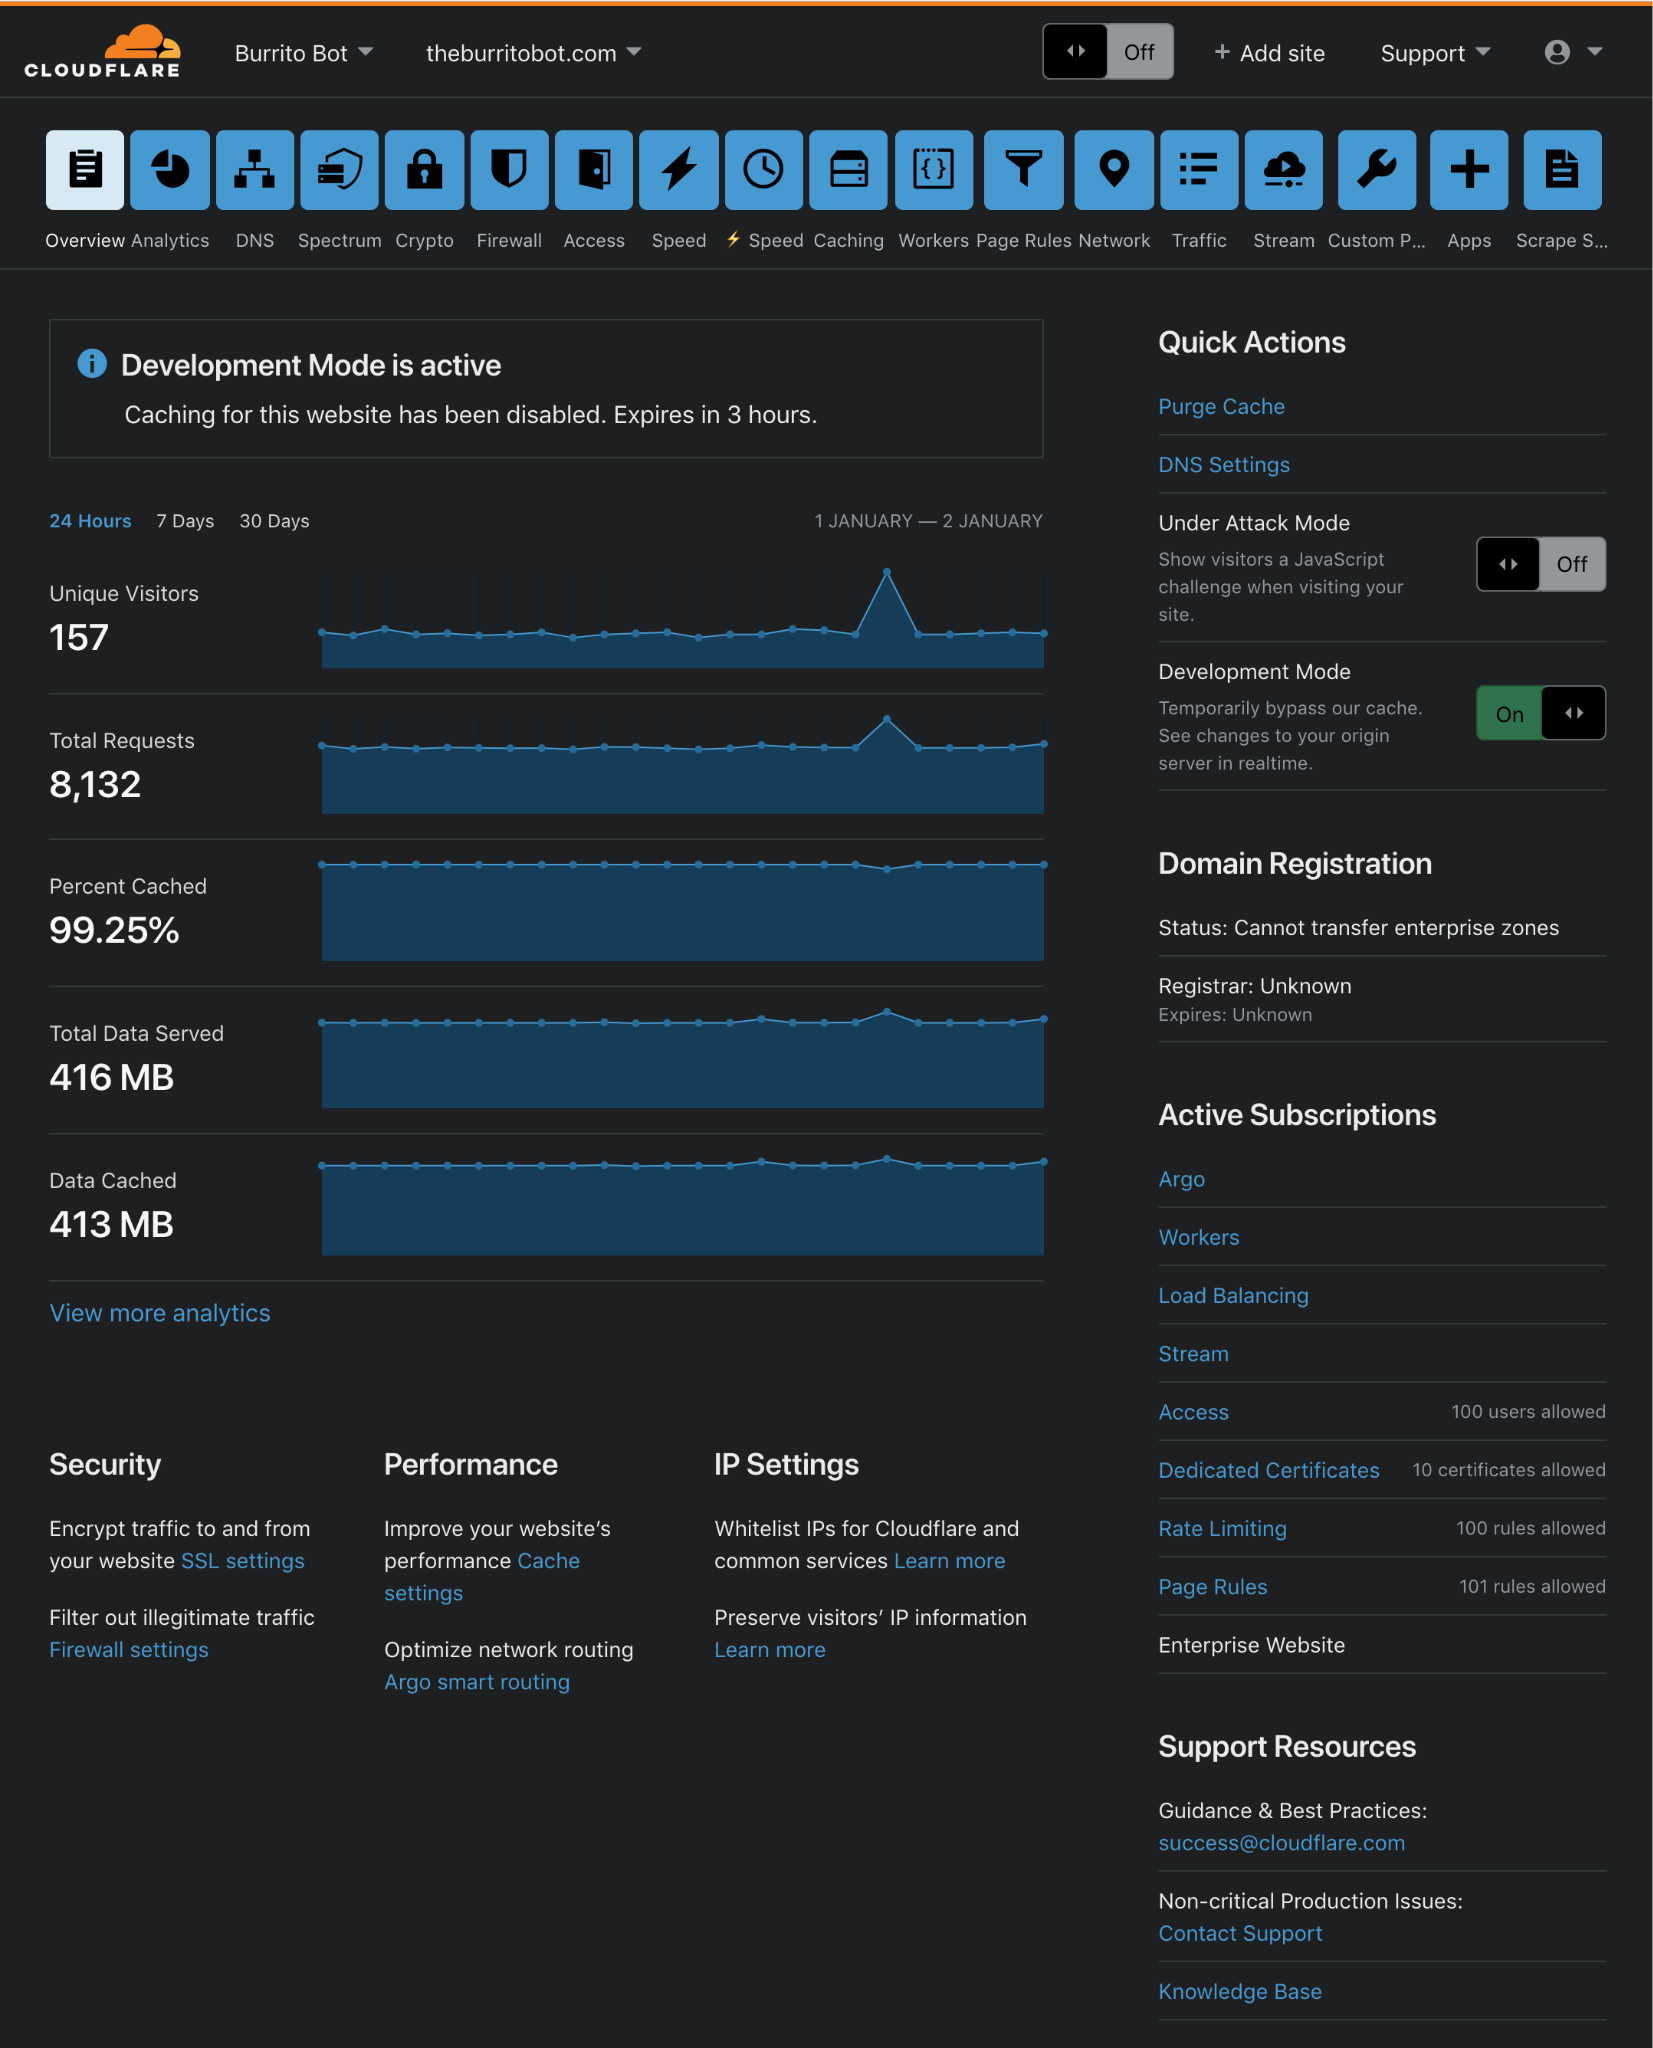 Dark Mode for the Cloudflare Dashboard